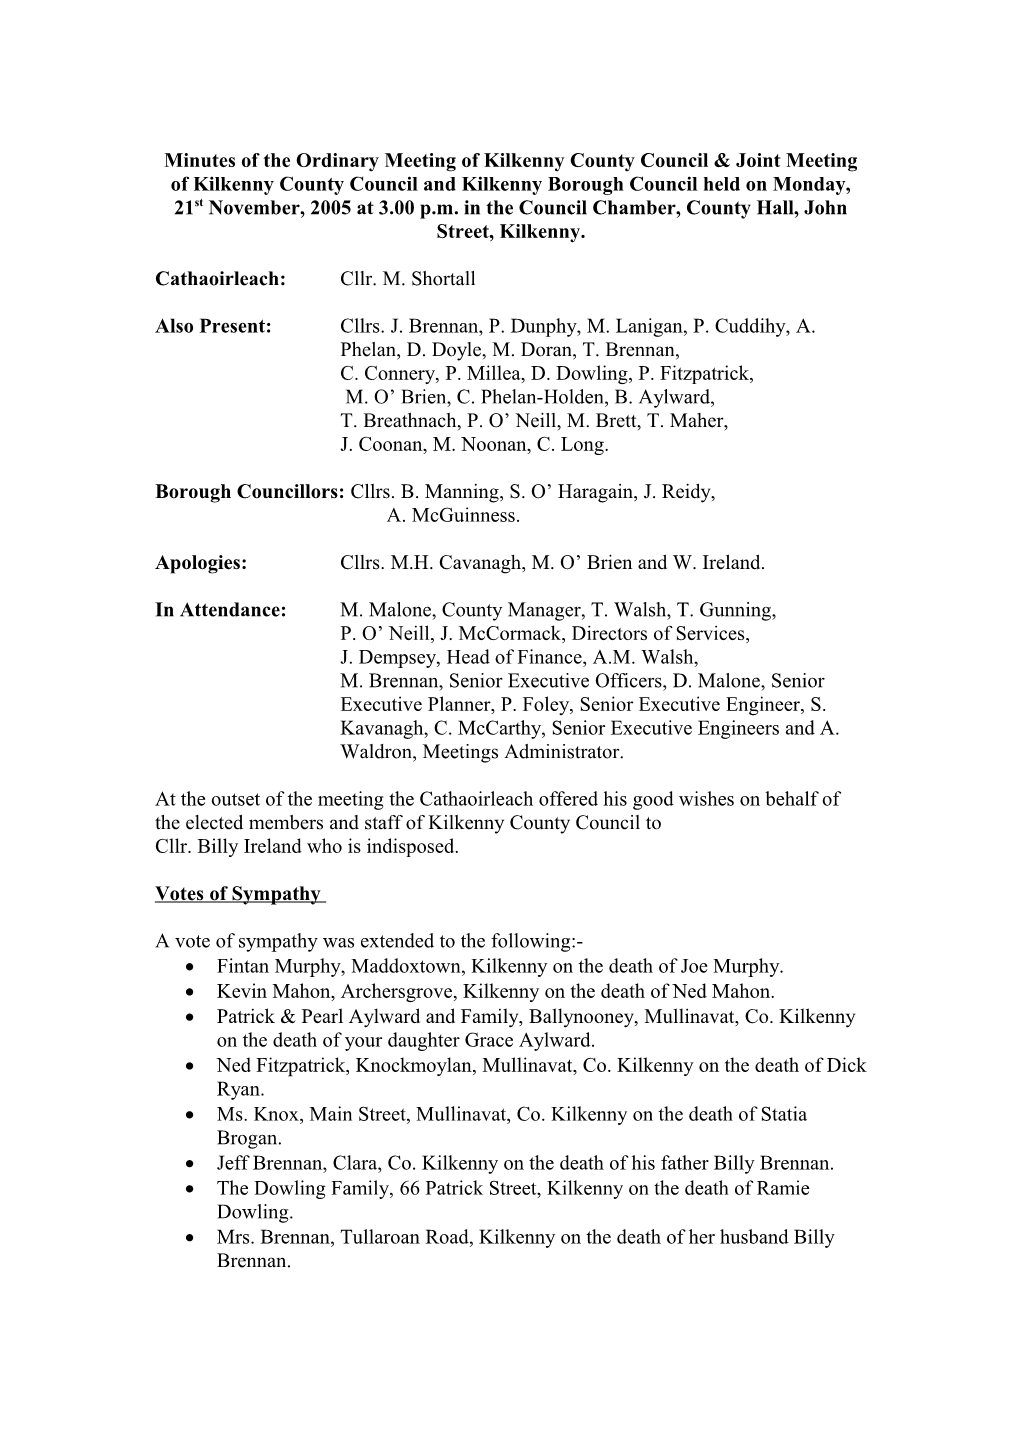 Minutes of the Ordinary Meeting of Kilkenny County Council Joint Meeting of Kilkenny County